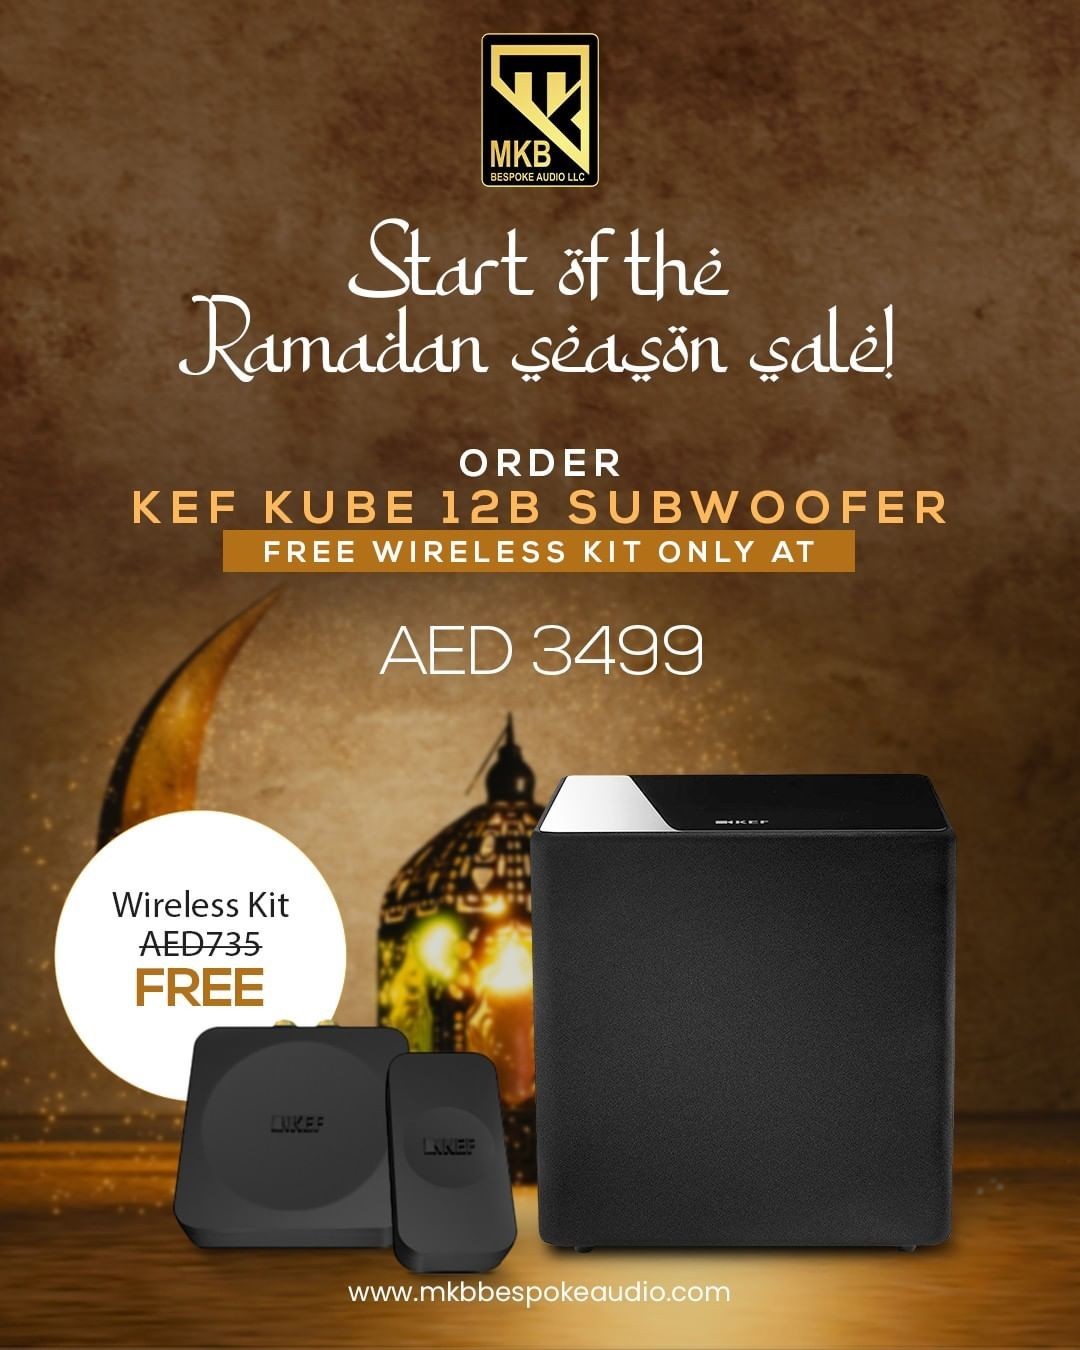 WIRELESS KIT FREE with KEF KUBE 12b SUBWOOFER at AED 3499 